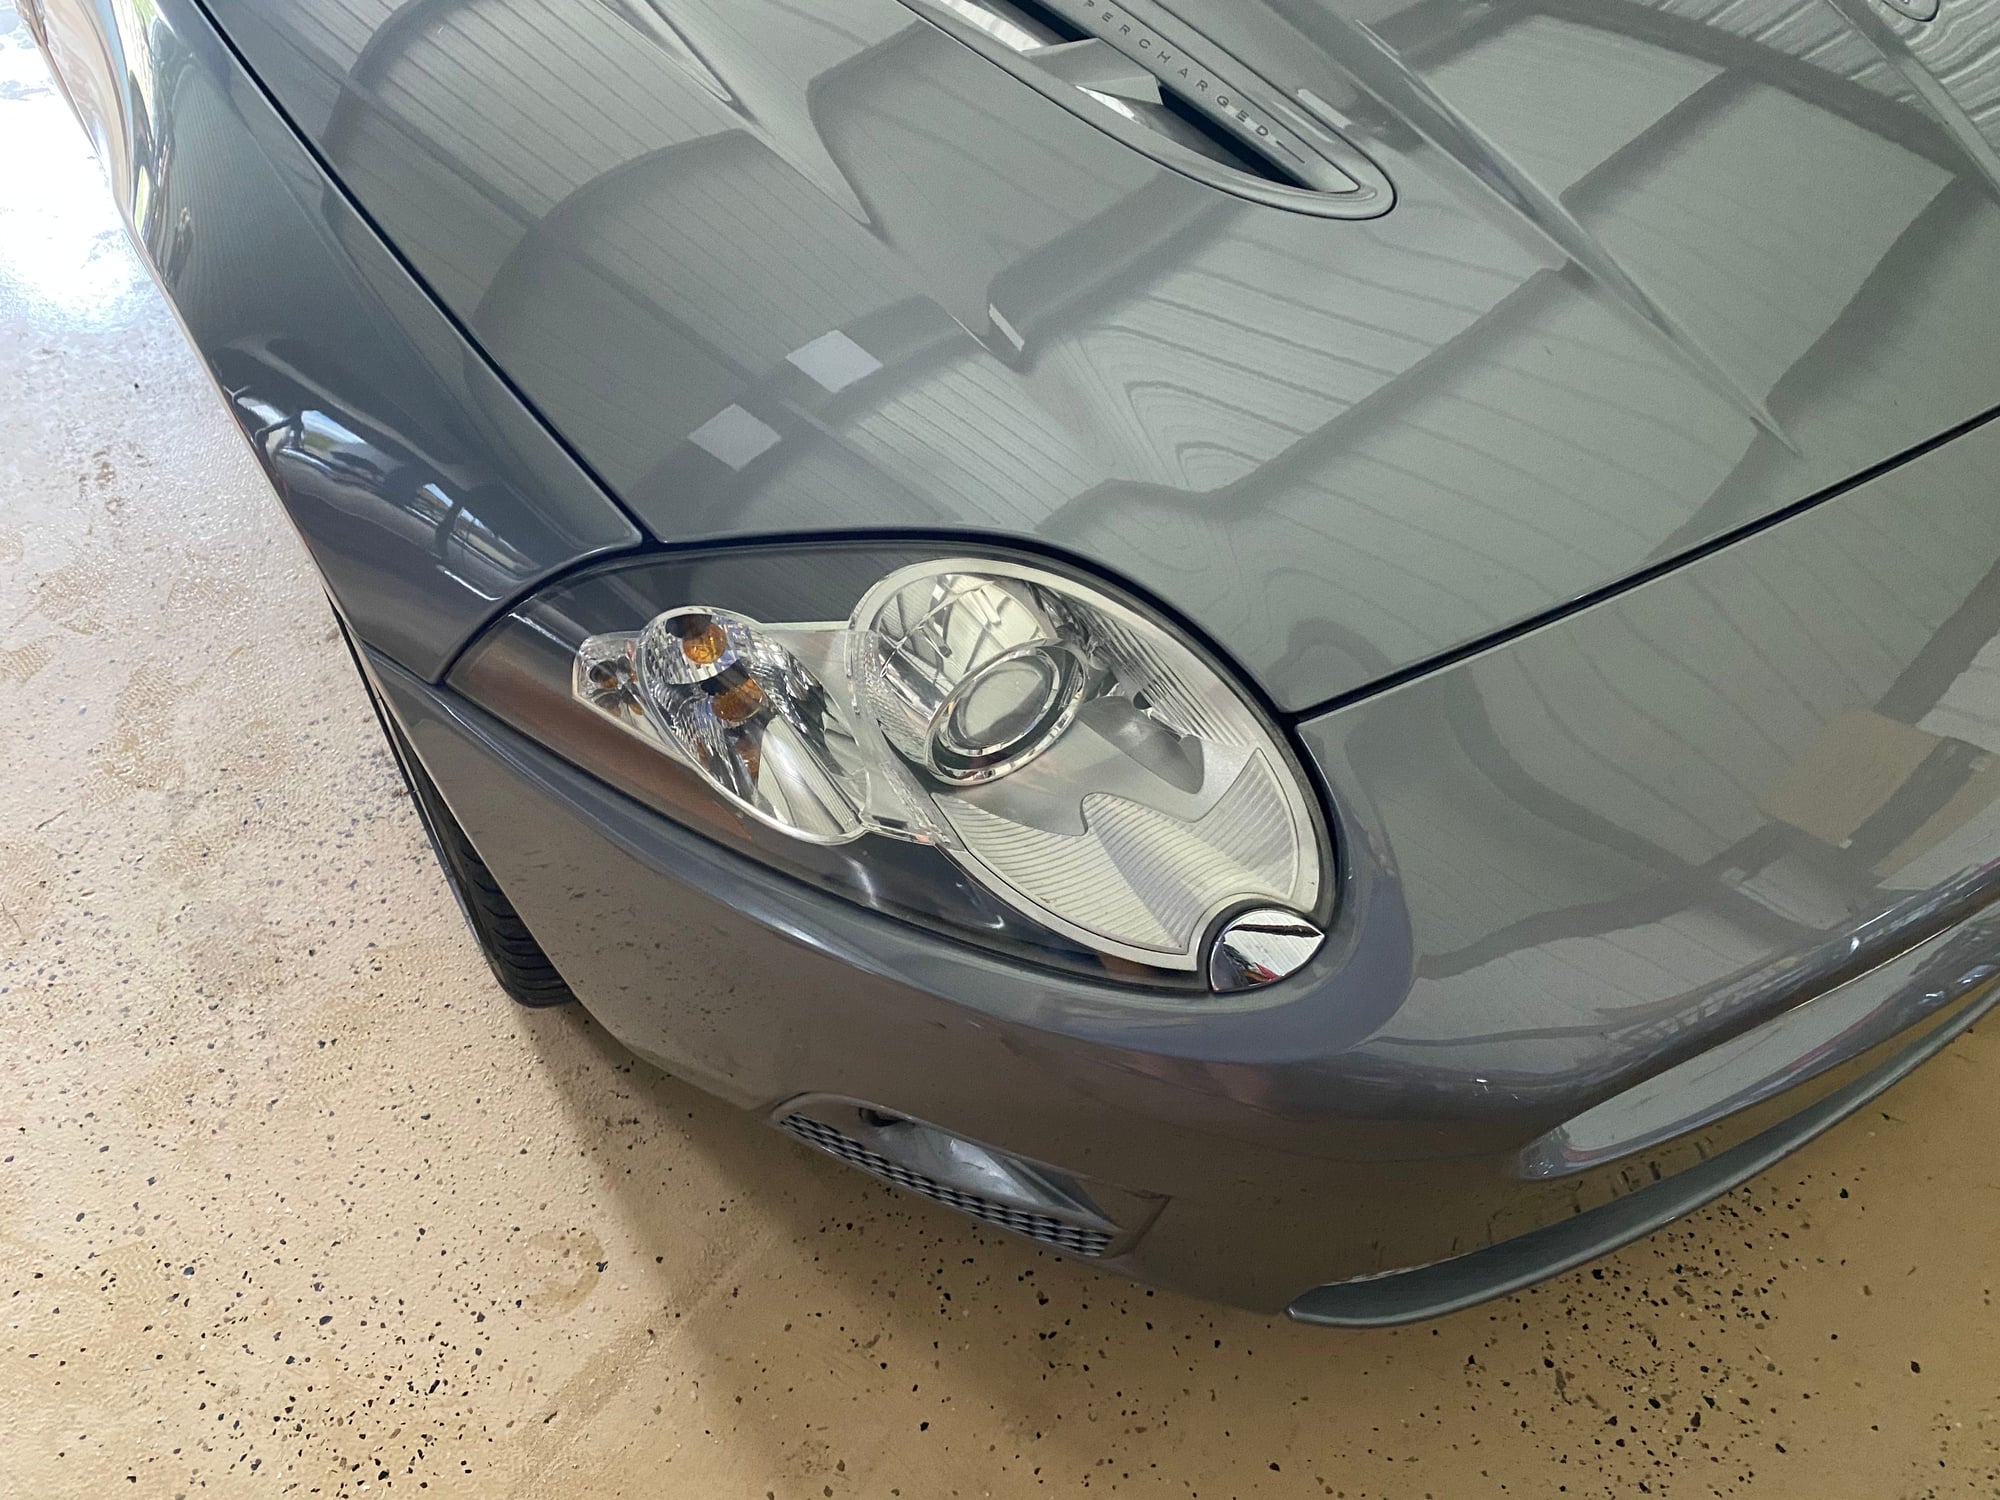 2007 Jaguar XKR - 2007 Jaguar XKR - Used - VIN SAJWA43C079B11758 - 53,000 Miles - 8 cyl - 2WD - Automatic - Coupe - Gray - Dripping Springs, TX 78620, United States